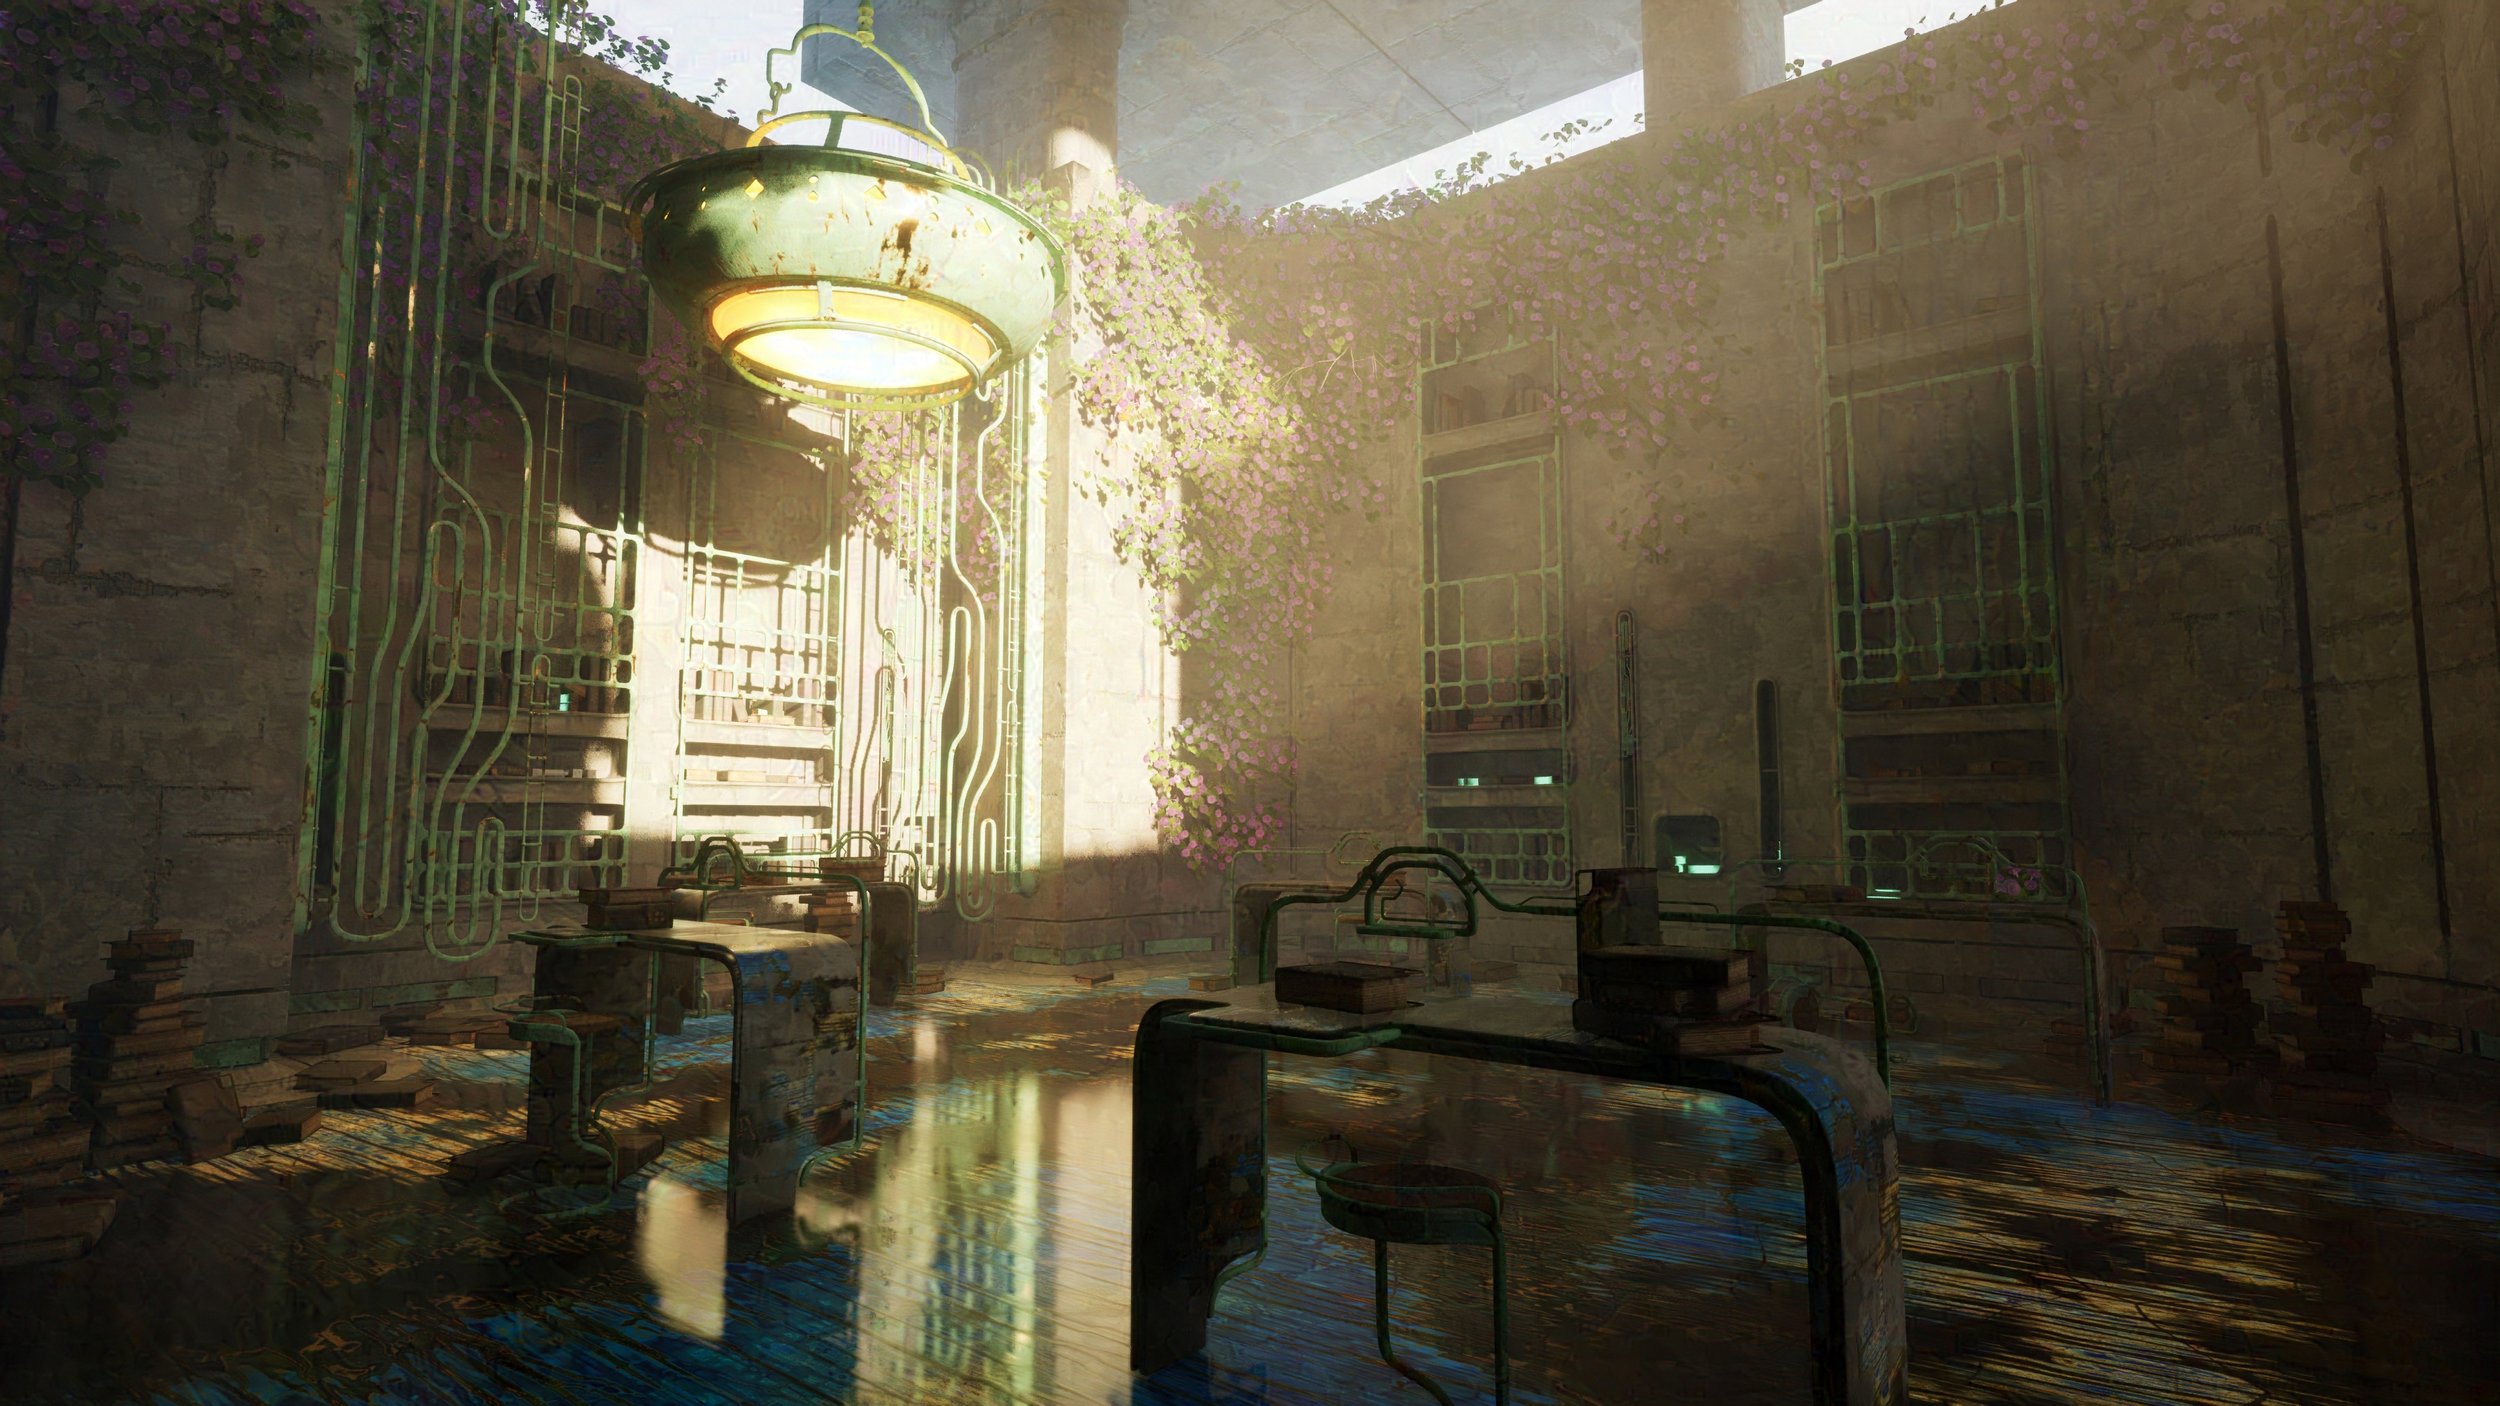  Alien Library environment in UE5. I designed and modeled this space after being inspired by a visit to a local public library. Image is protected with Glaze so there are some artifacts and blurring. 